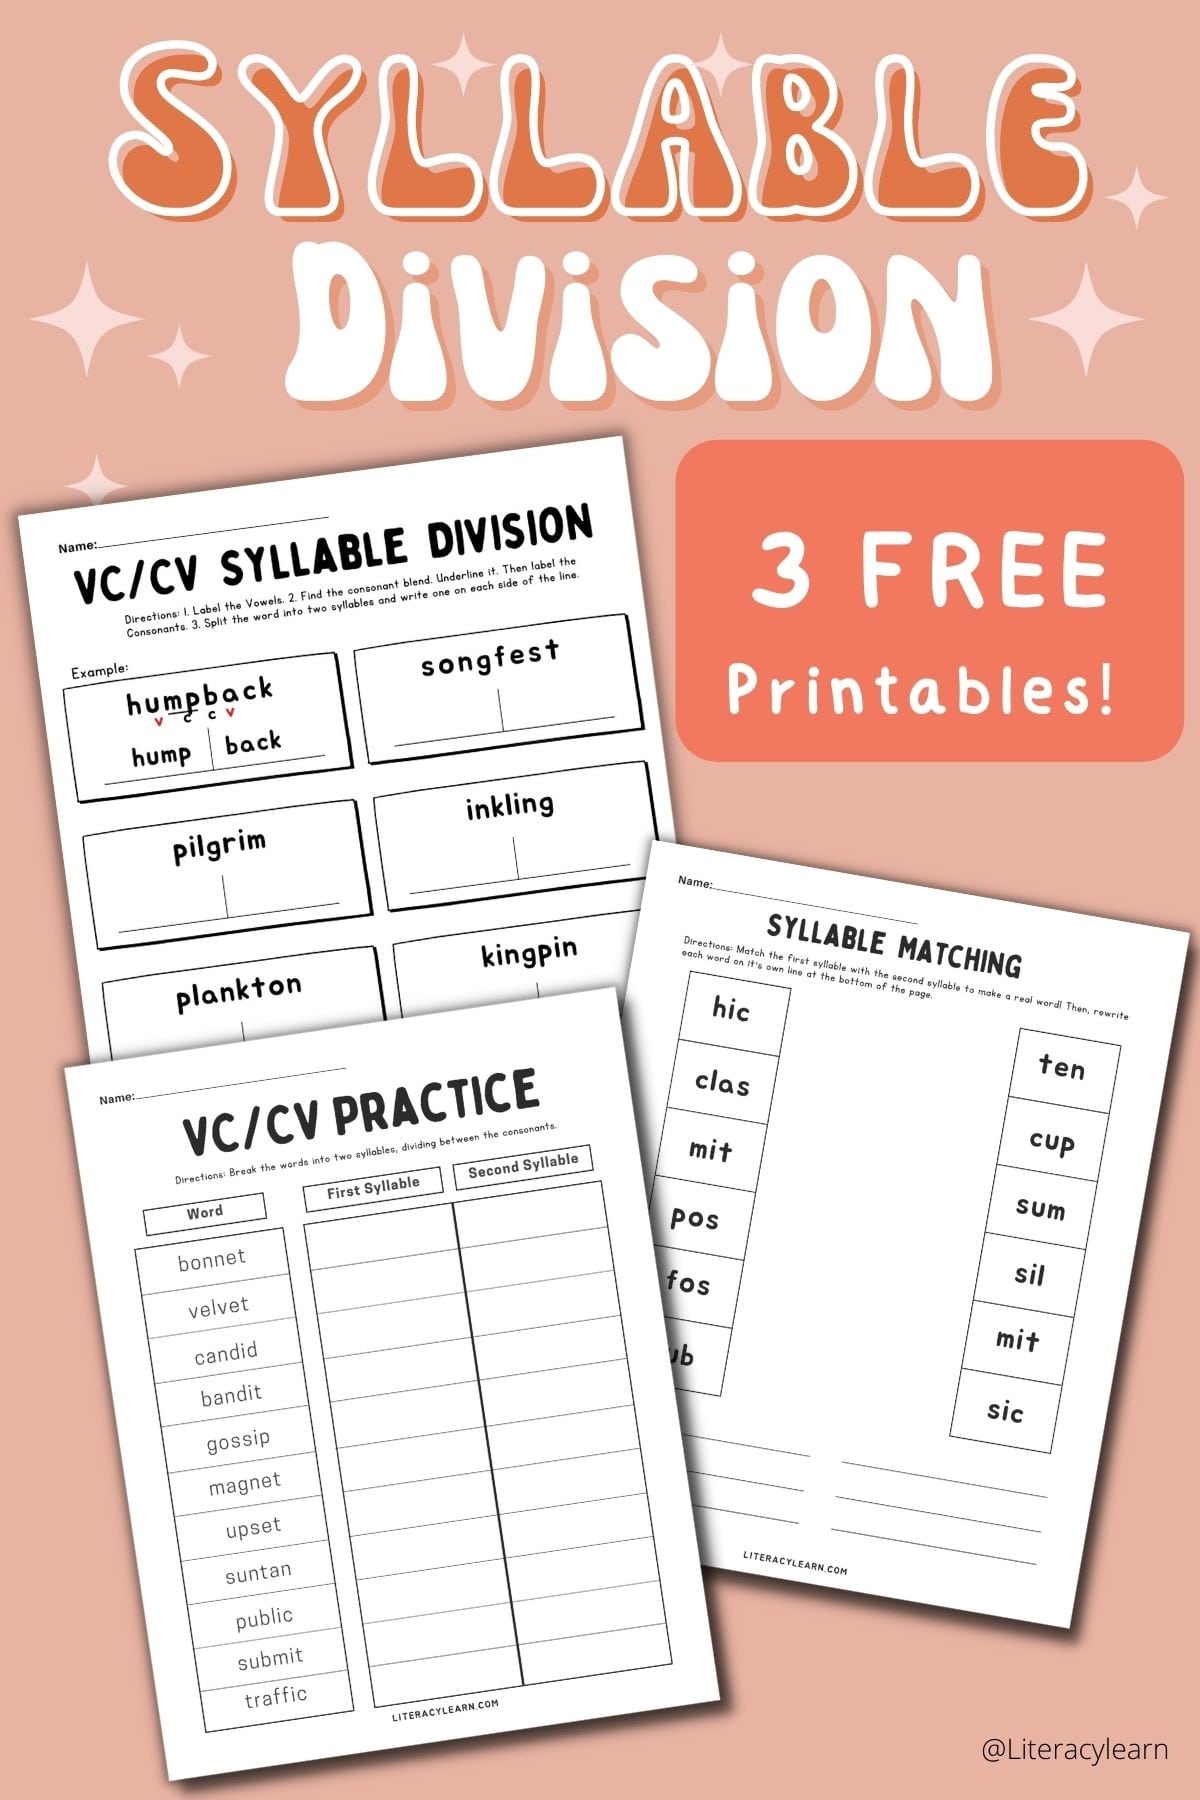 Pinterest image with worksheets on a pink background with "Syllable Division" on top.